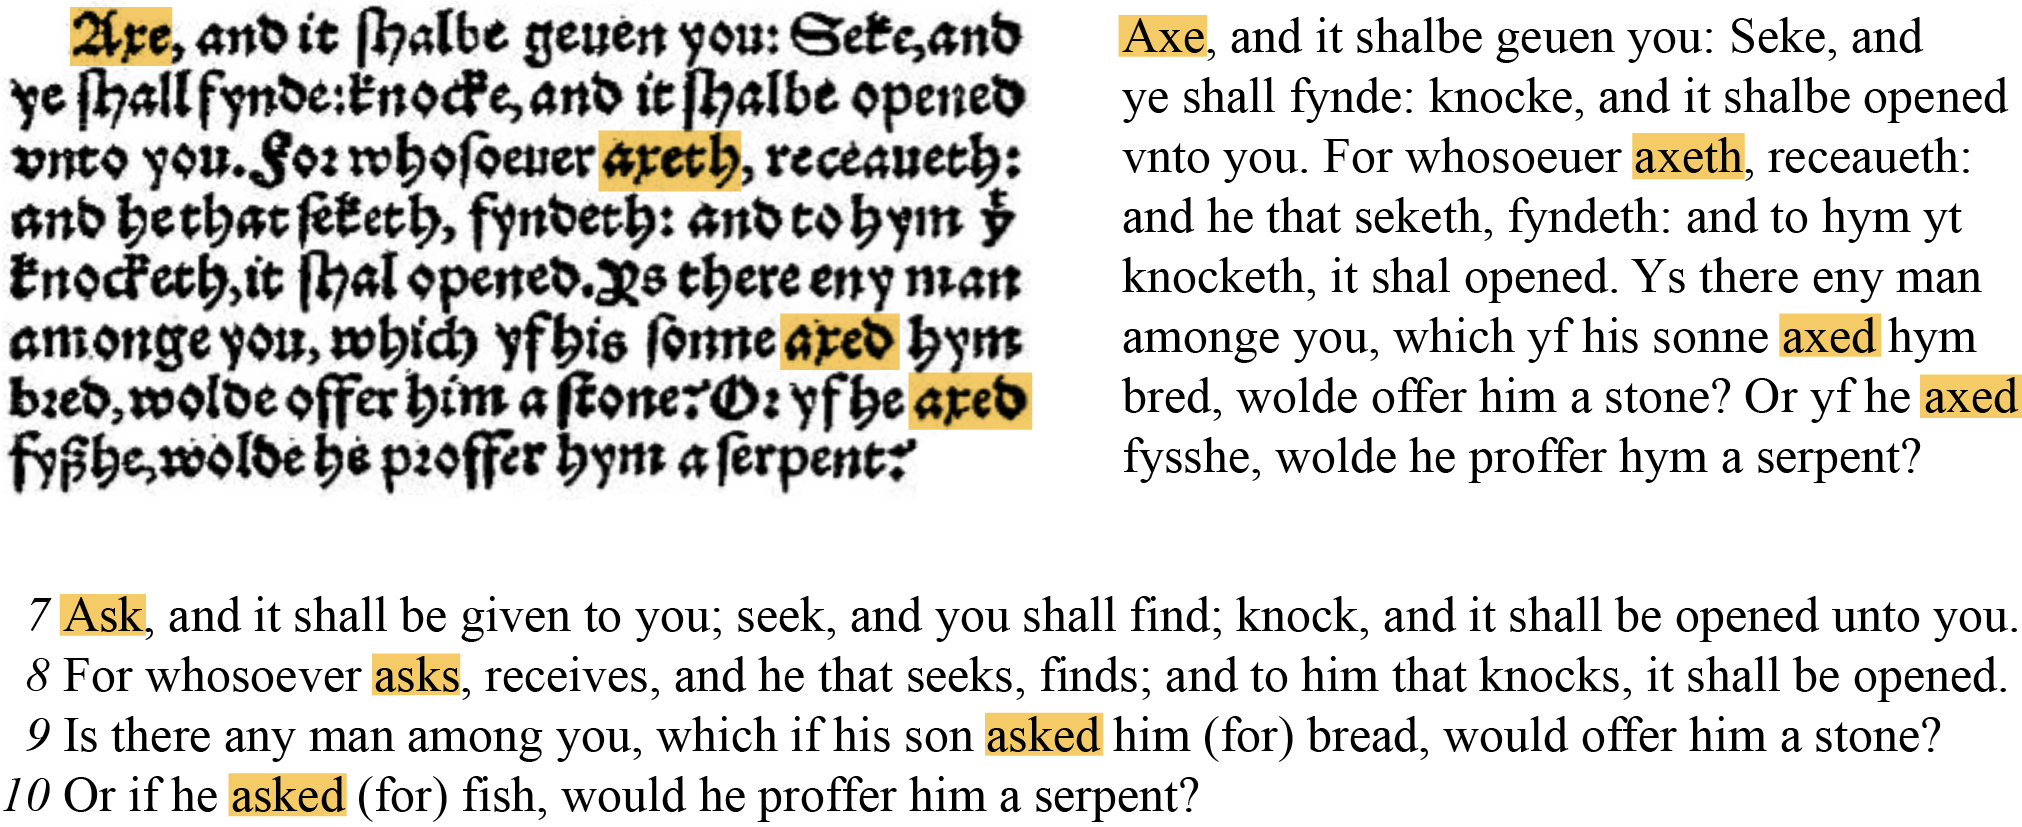 Three versions of Matthew 7:7 from the Coverdale Bible. Top left is a scan of the original. Top right is a transcription of the same text, as follows: "Axe, and it shalbe geuen you: Seke, and ye shall fynde: knocke, and it shalbe opened vnto you. For whosoeuer axeth, receaueth: and he that seketh, fyndeth: and to hym yt knocketh, it shal opened. Ys there eny man amonge you, which yf his sonne axed hym bred, wolde offer him a stone? Or yf he axed fysshe, wolde he proffer hym a serpent?" Across the bottom centre is a more modern version of the same text, as follows: "7 Ask, and it shall be given to you; seek, and you shall find; knock, and it shall be opened unto you. 8 For whosoever asks, receives, and he that seeks, finds; and to him that knocks, it shall be opened. 9 Is there any man among you, which if his son asked him (for) bread, would offer him a stone? 10 Or if he asked (for) fish, would he proffer him a serpent?". In each version, the four instances of axe/ask are highlighted.